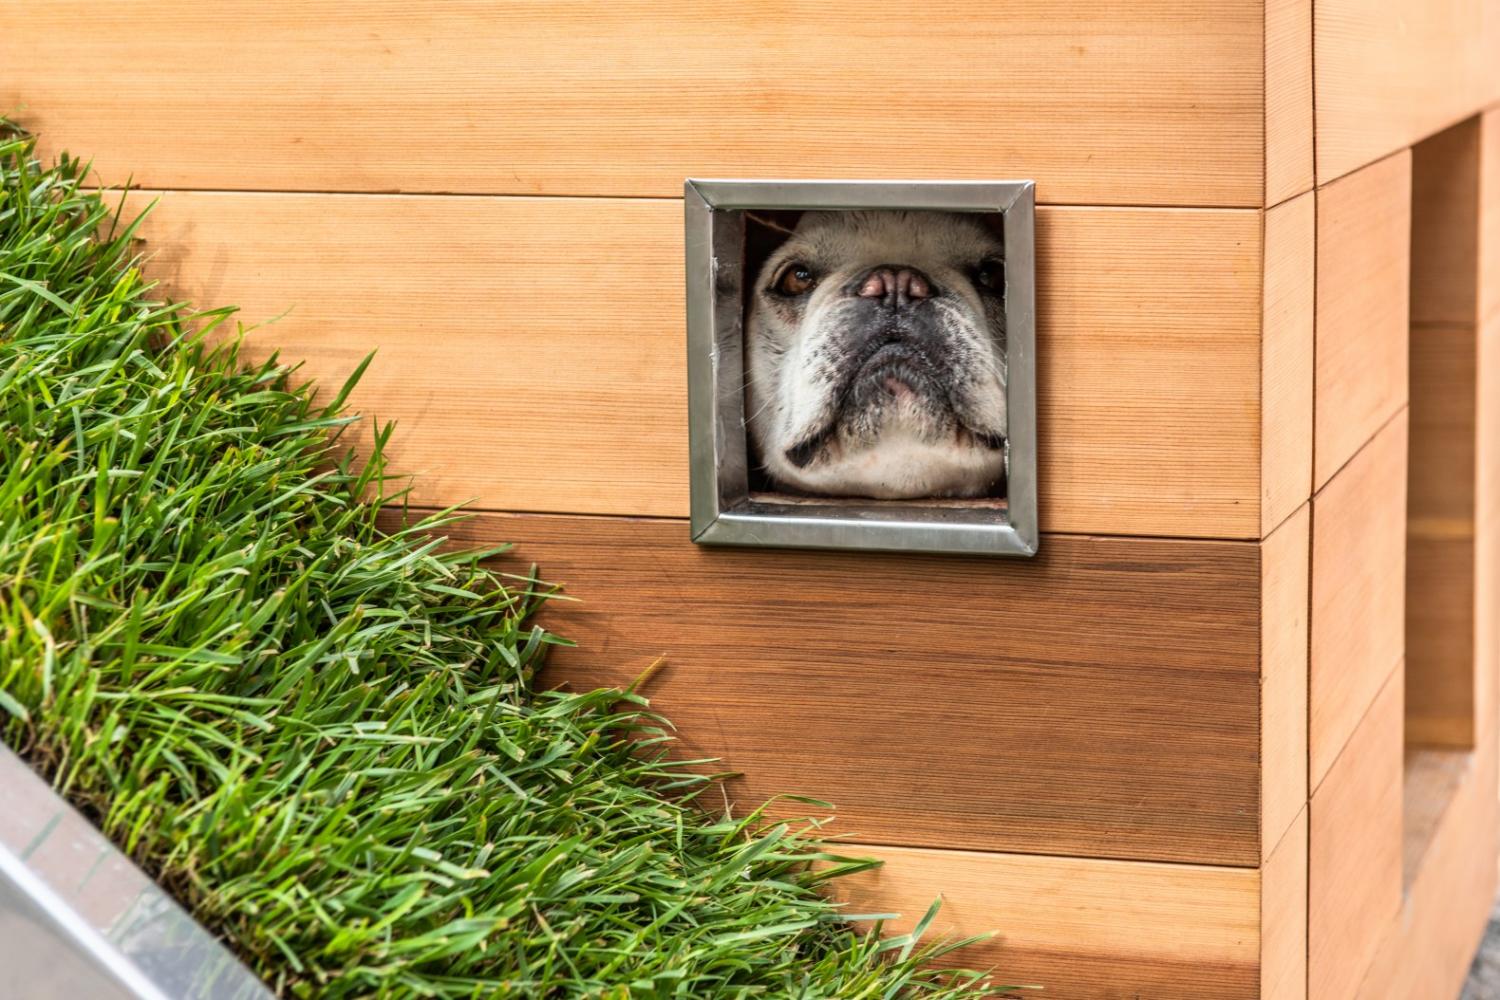 Studio Schicketanz Modern Dog House Is Made With Grass Ramp, and An Automatic Water Faucet On Top